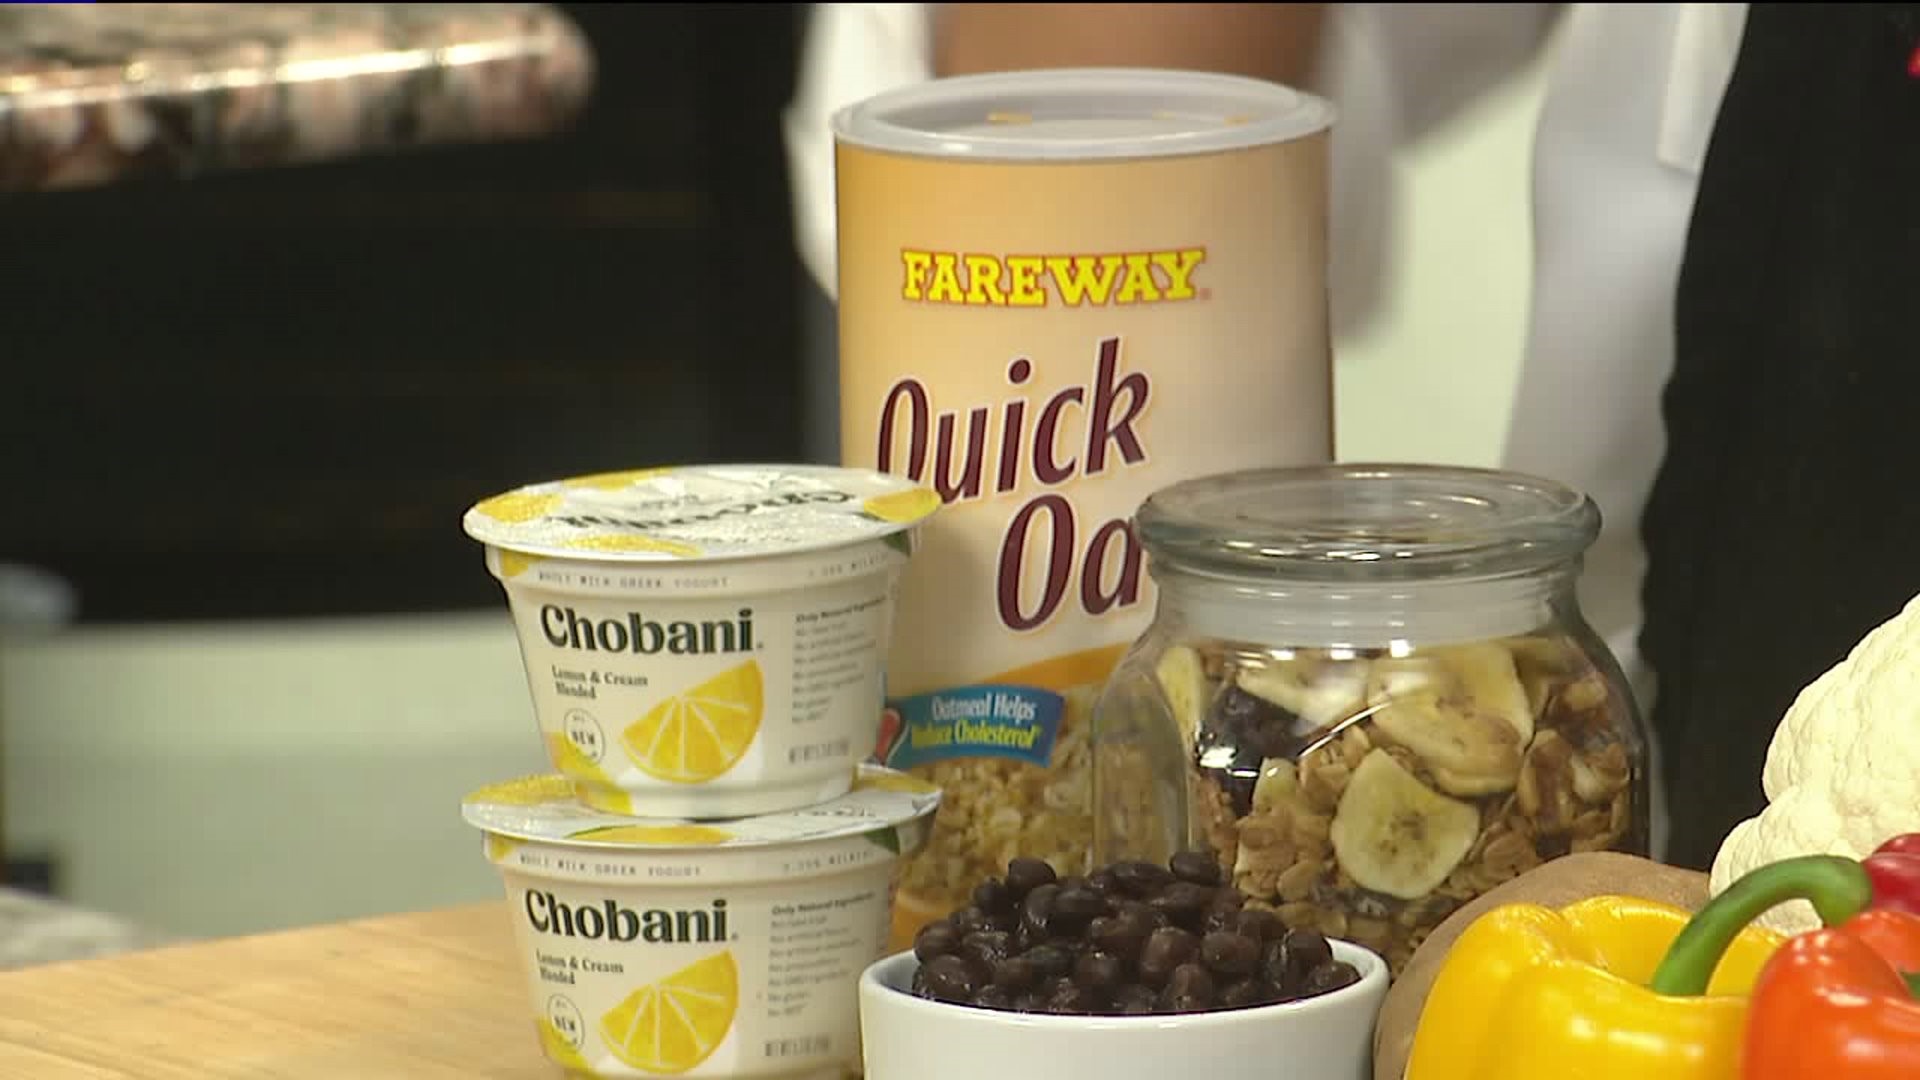 In the Kitchen with Fareway: National Nutrition Month